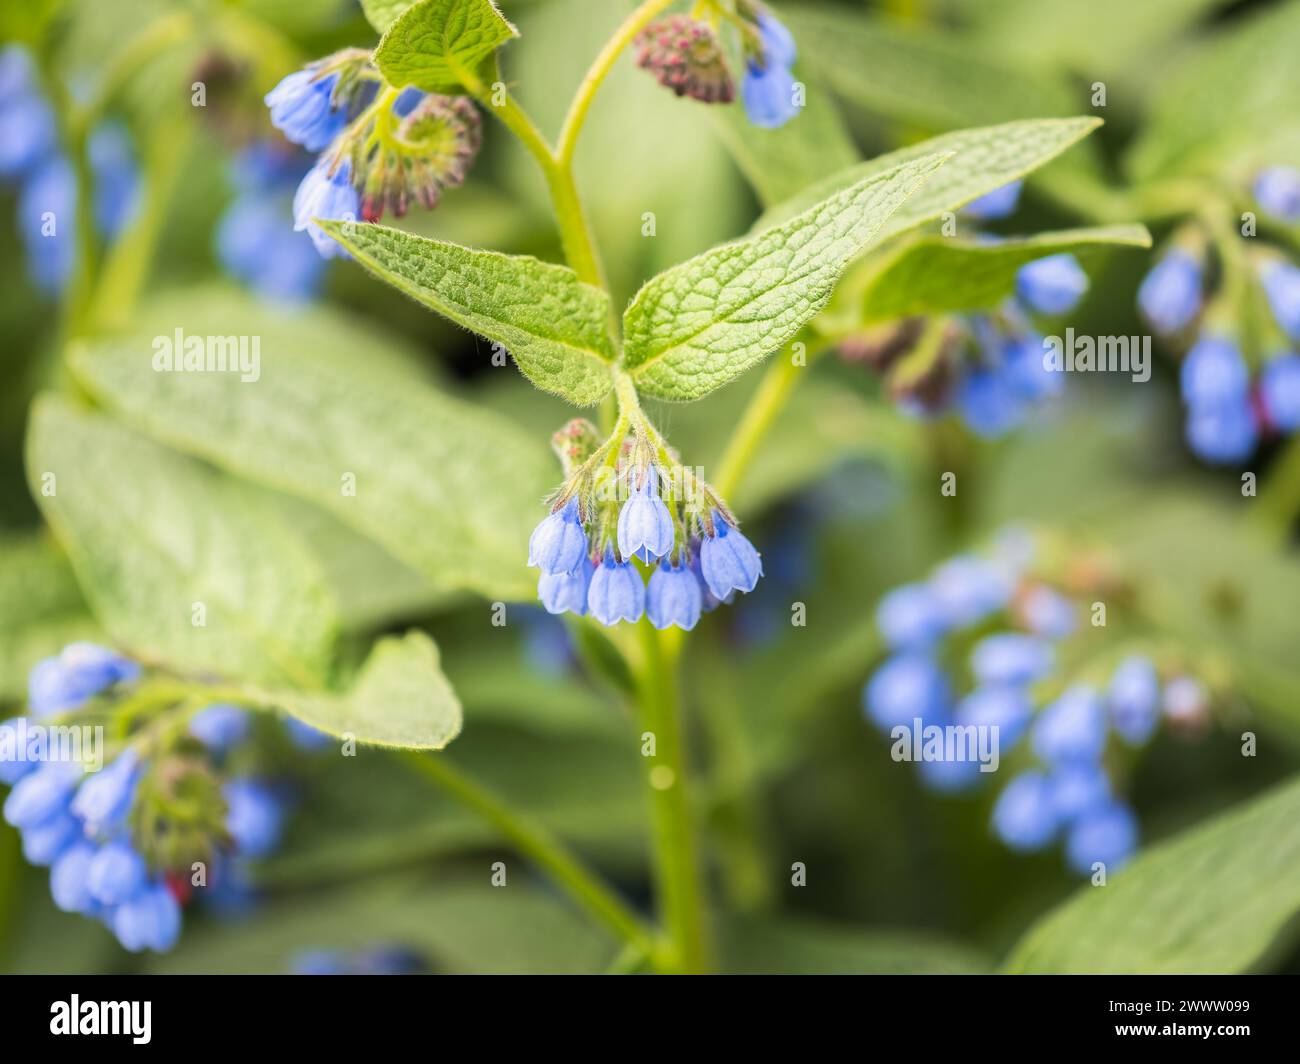 Beautiful blue flowers of Symphytum caucasicum, also known as the beinwell, blue comfrey, or Caucasian comfrey, blooming in spring park Stock Photo